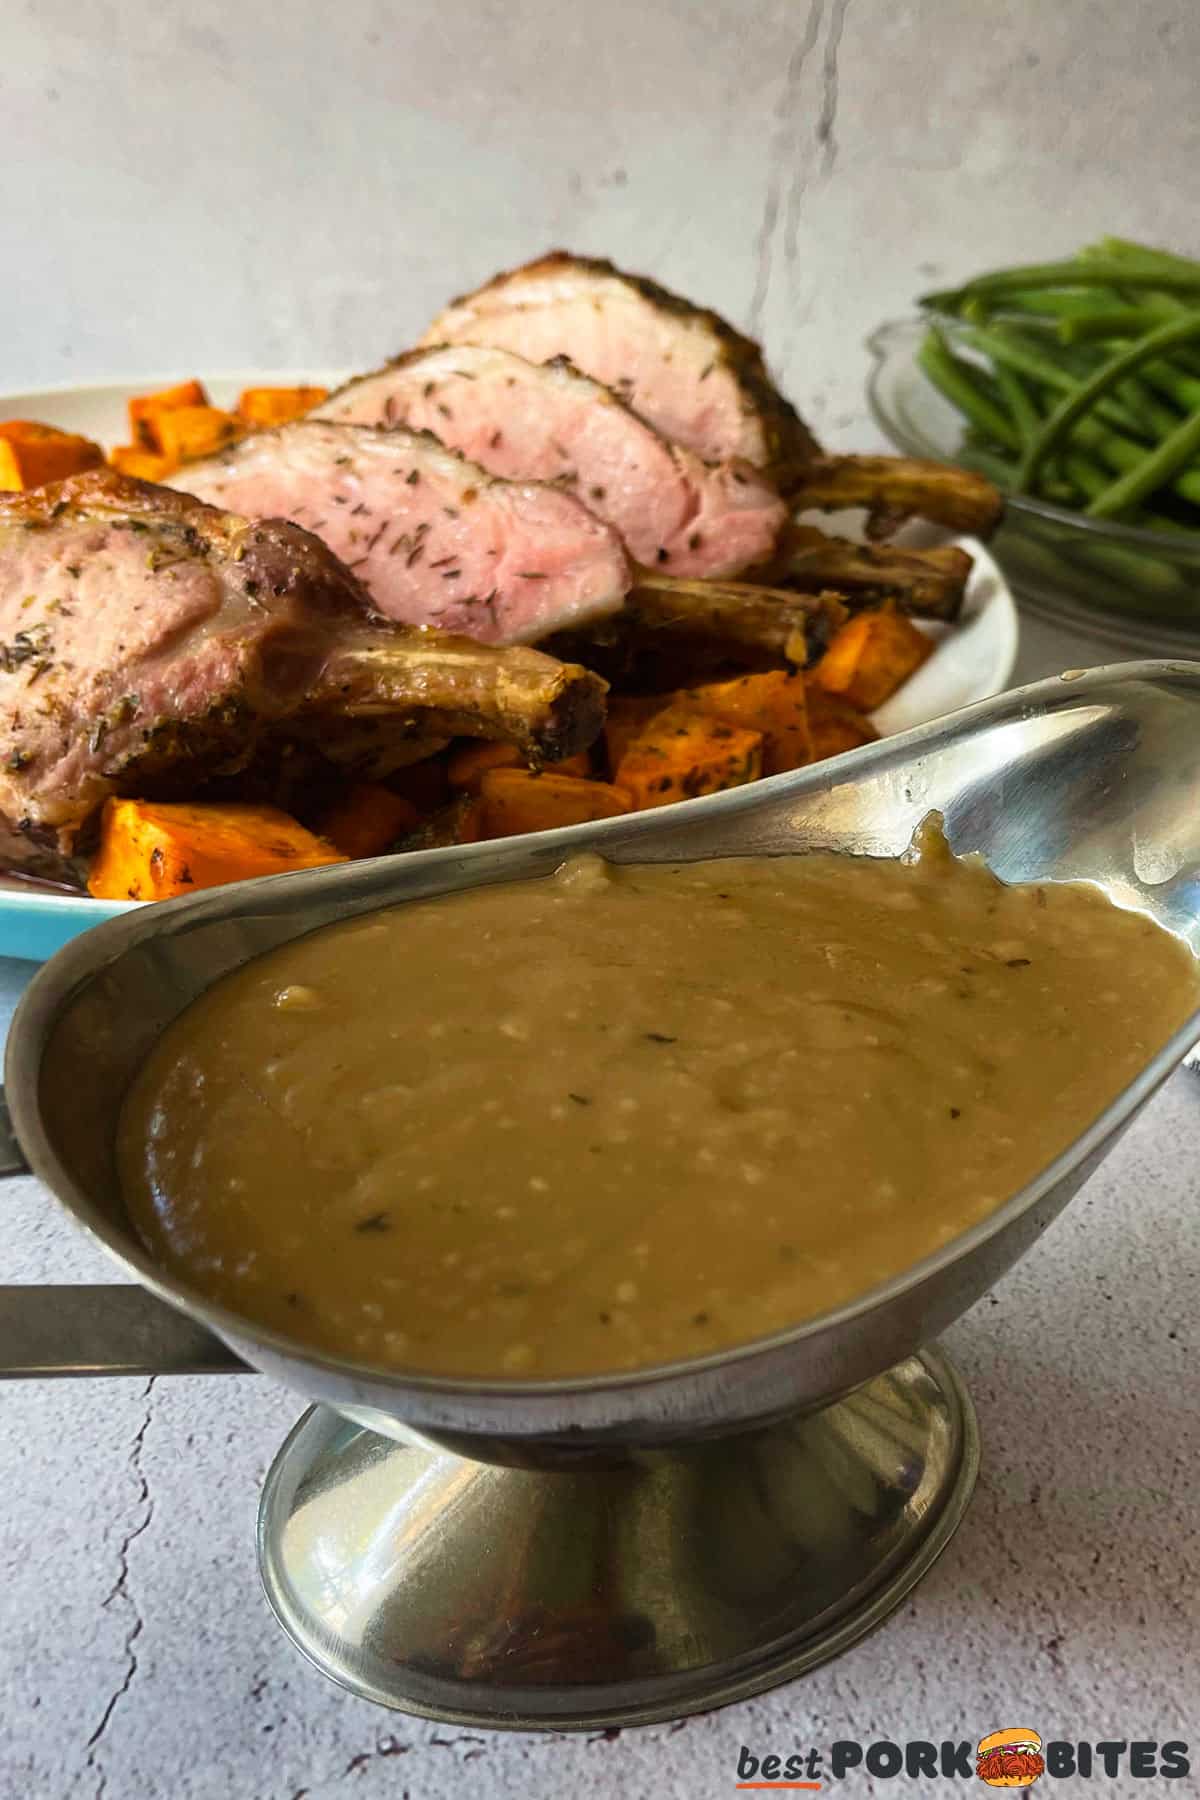 a saucer of gravy in front of a dish of pork chops, sweet potatoes and green beans